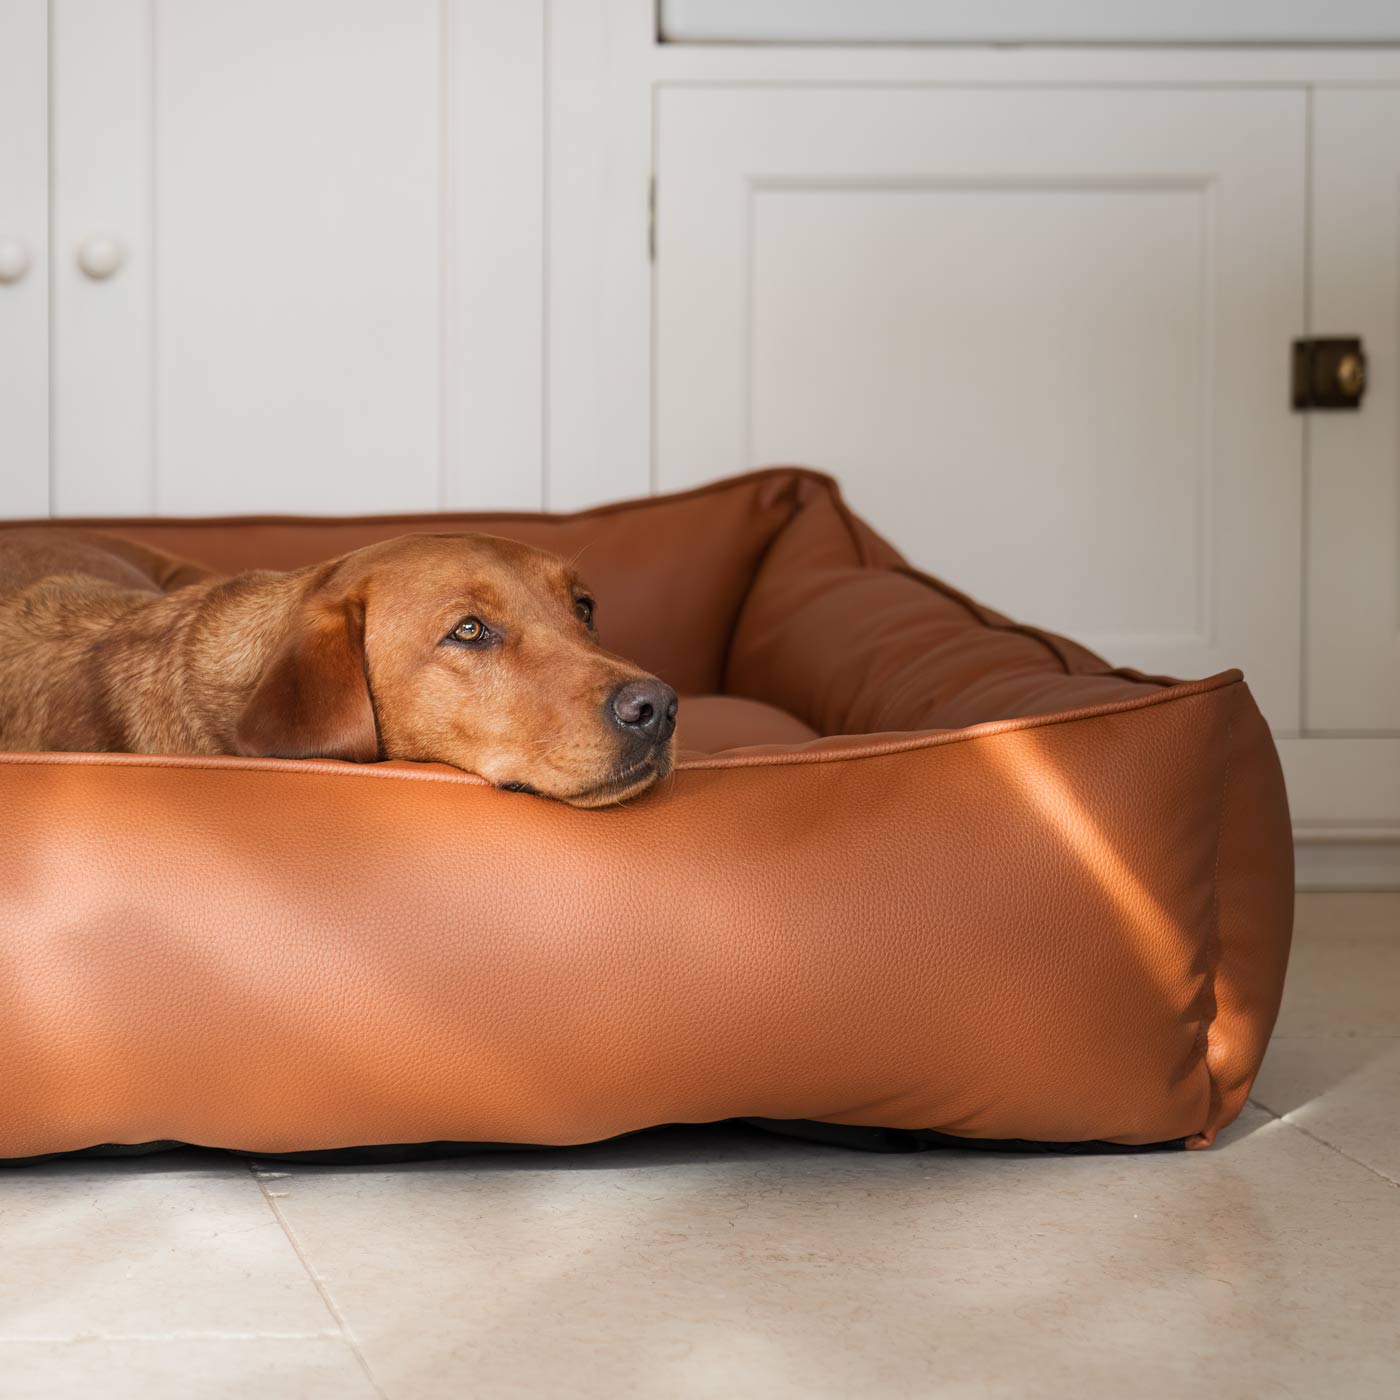 Luxury Handmade Box Bed in Rhino Tough Desert Faux Leather, in Ember, Perfect For Your Pets Nap Time! Available To Personalize at Lords & Labradors US